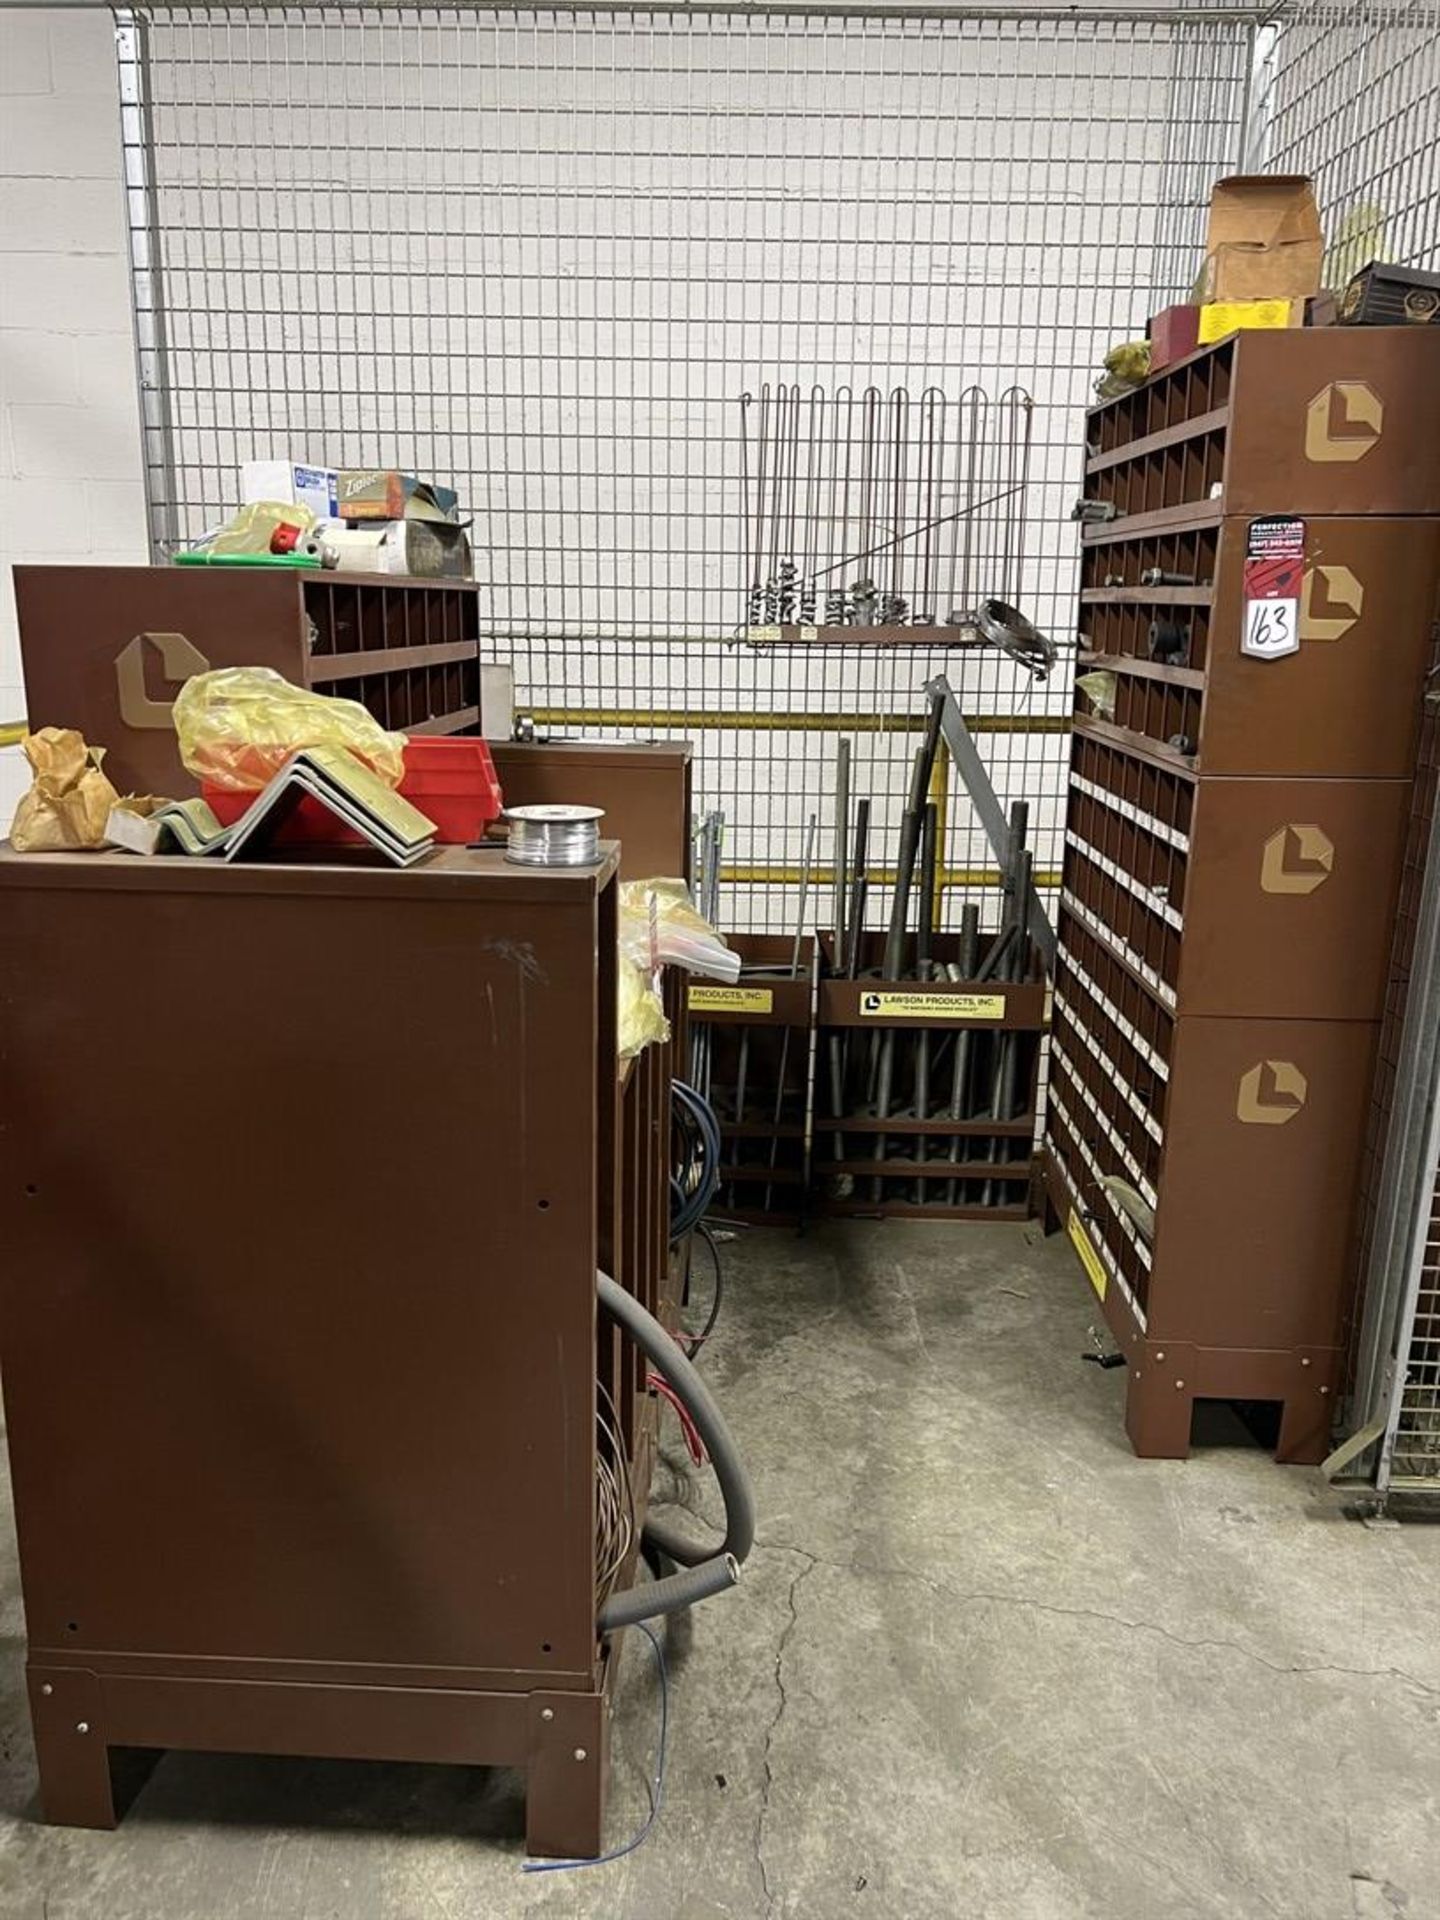 Lot Comprising LAWSON Hardware Cubie w/ Assorted Fasteners, LAWSON Work Area w/ Assorted Tubing